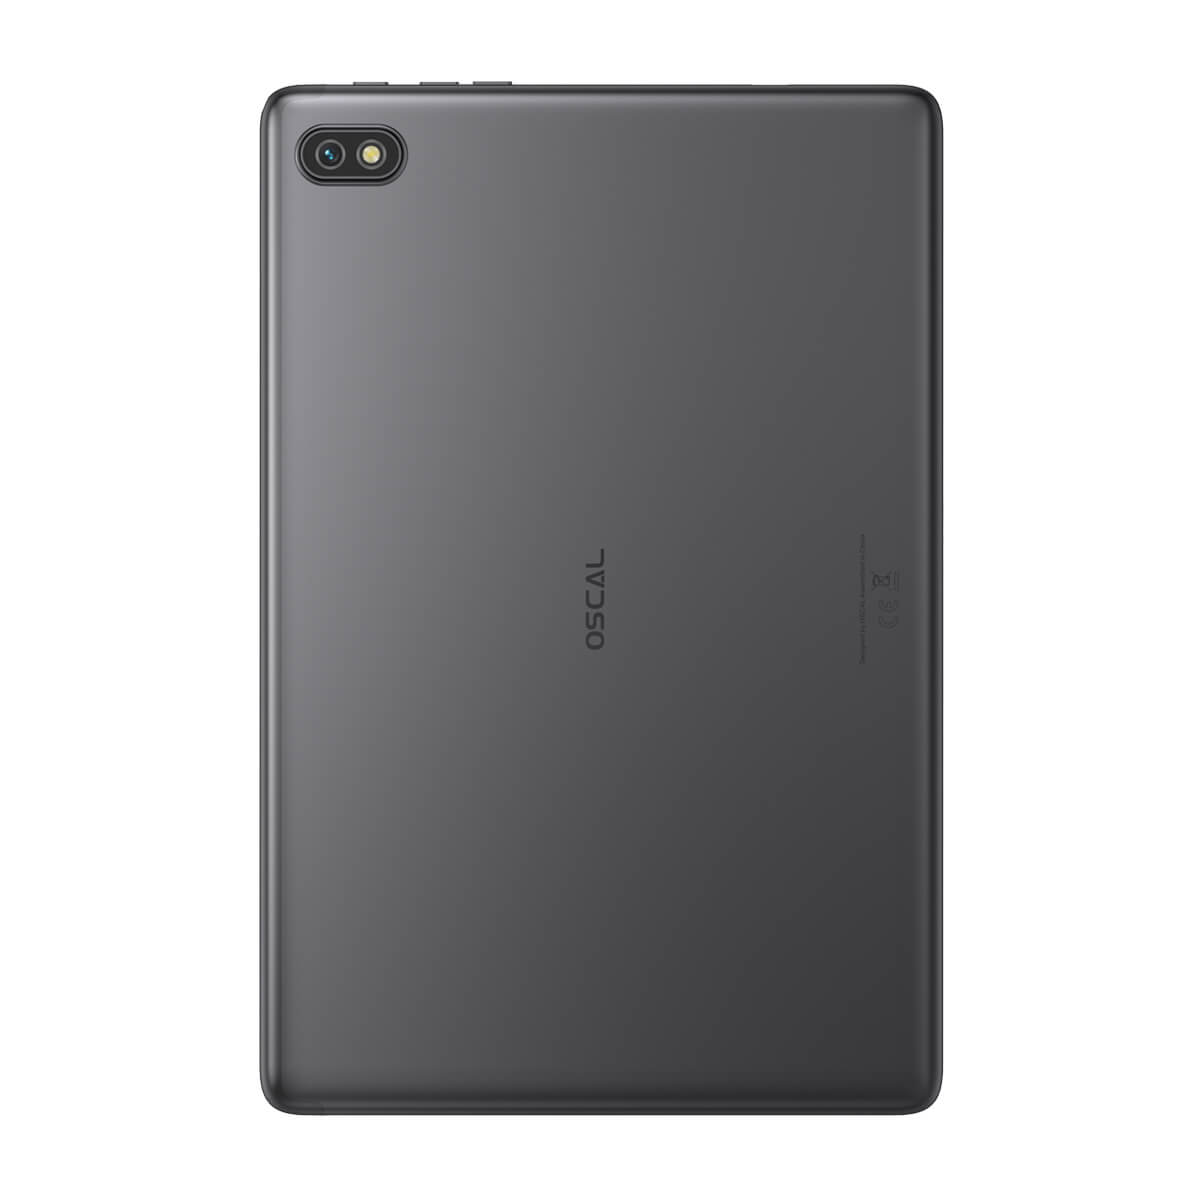 OSCAL Pad 10 8+128GB 6580mAh タブレット – Blackview Official Store